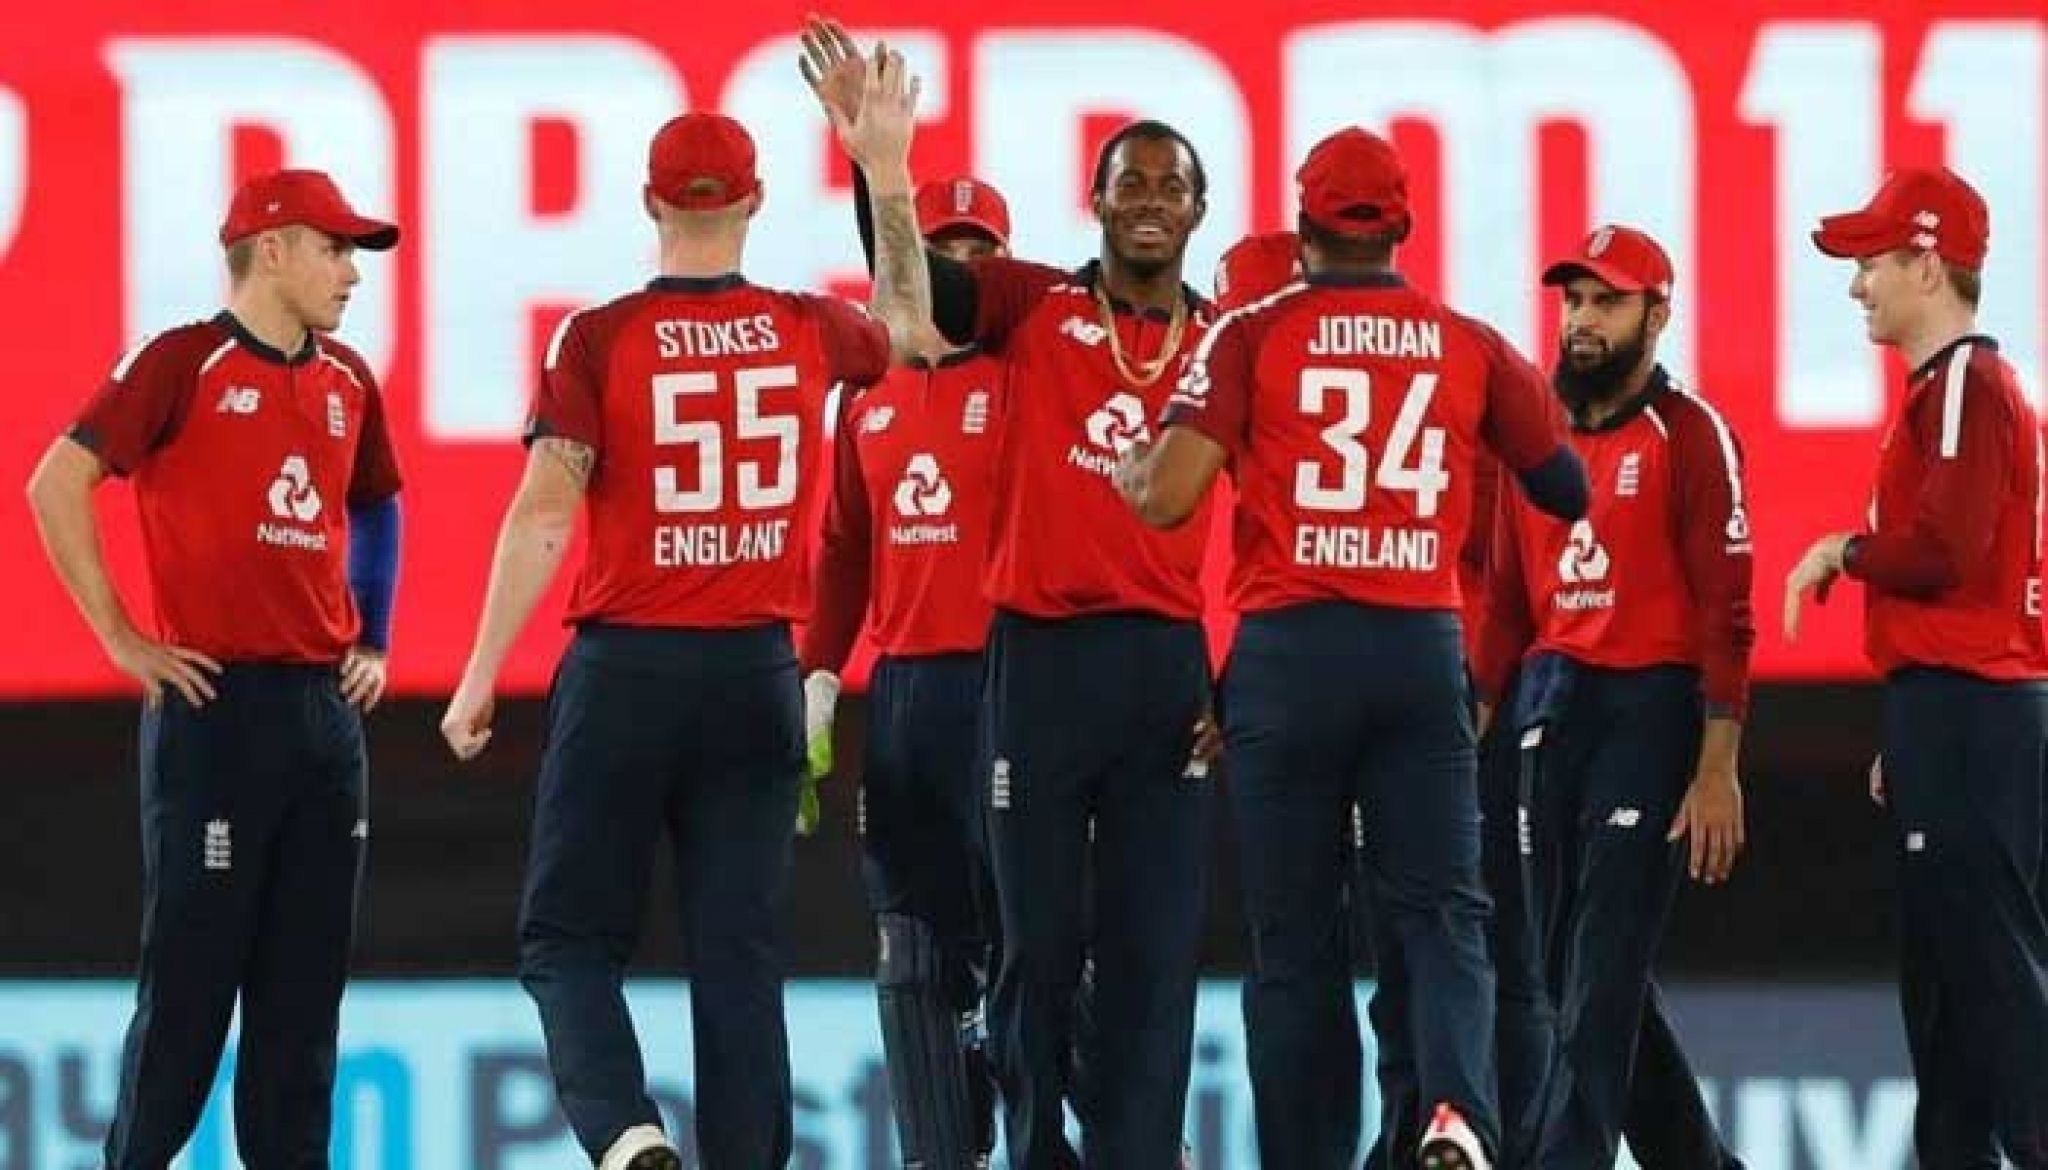 Pakistan tour priority for England cricketers over rescheduled IPL: ECB